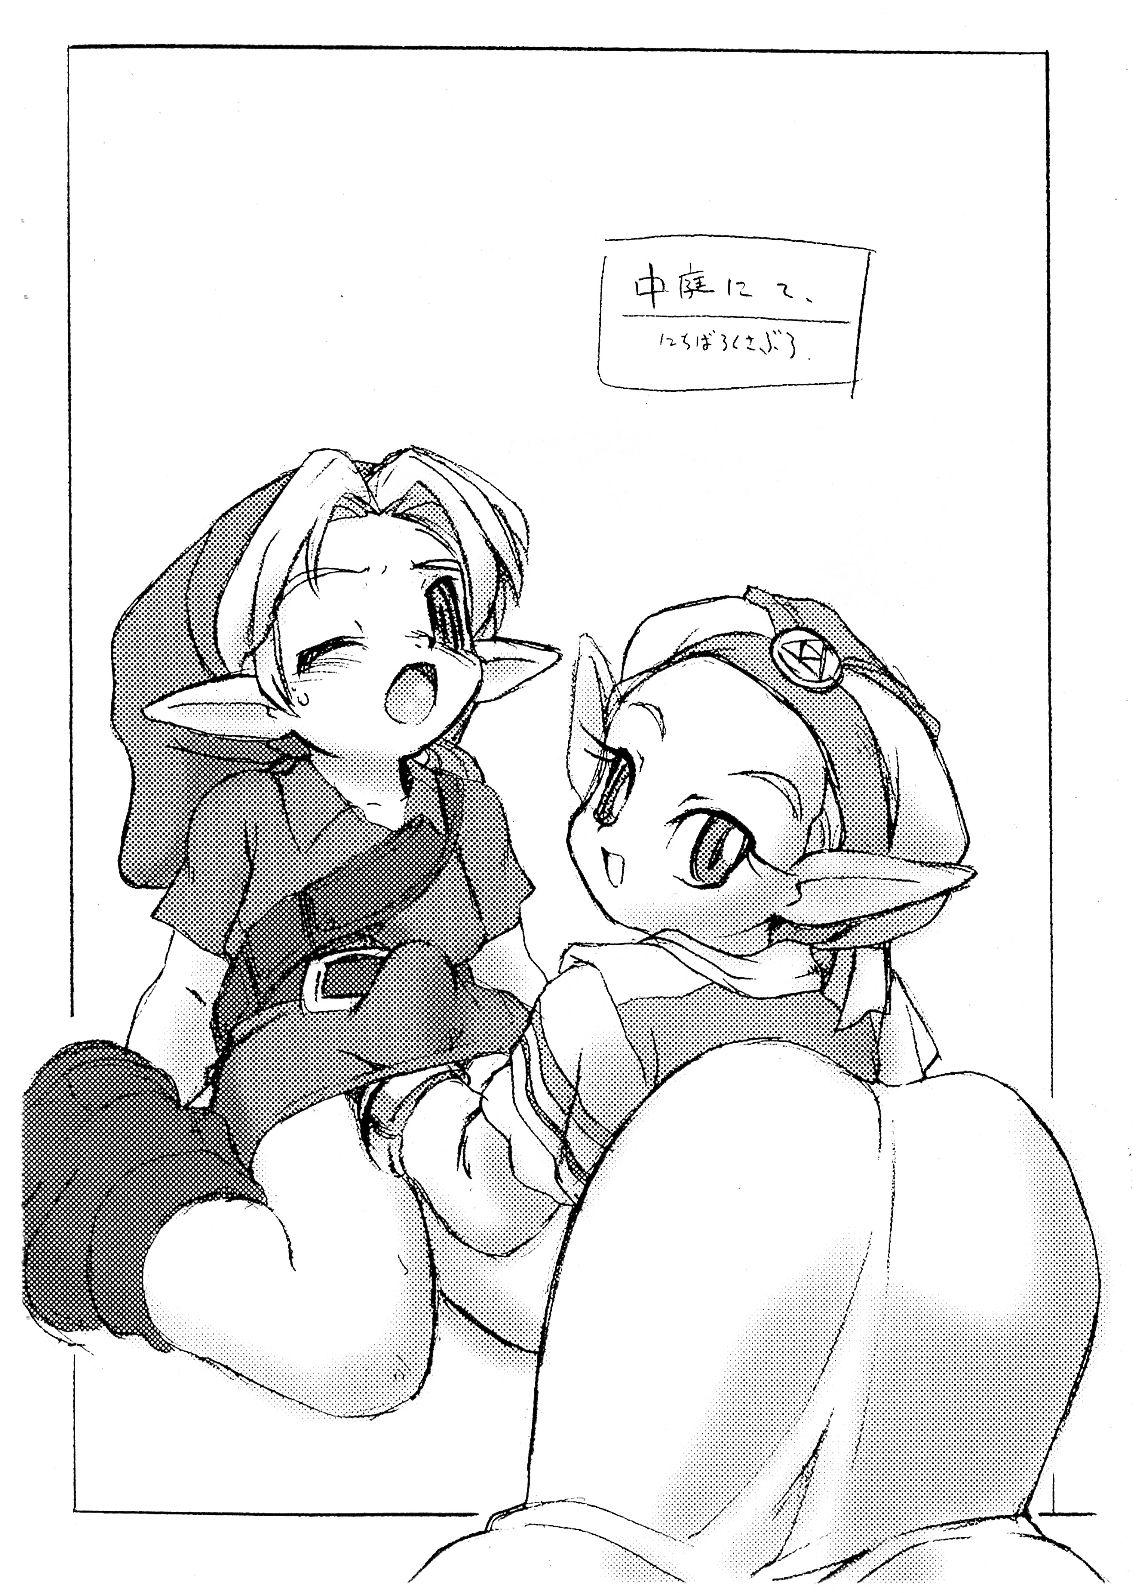 Vergon TOUCH DASH! + Omake - The legend of zelda Bakusou kyoudai lets and go Amatures Gone Wild - Page 7